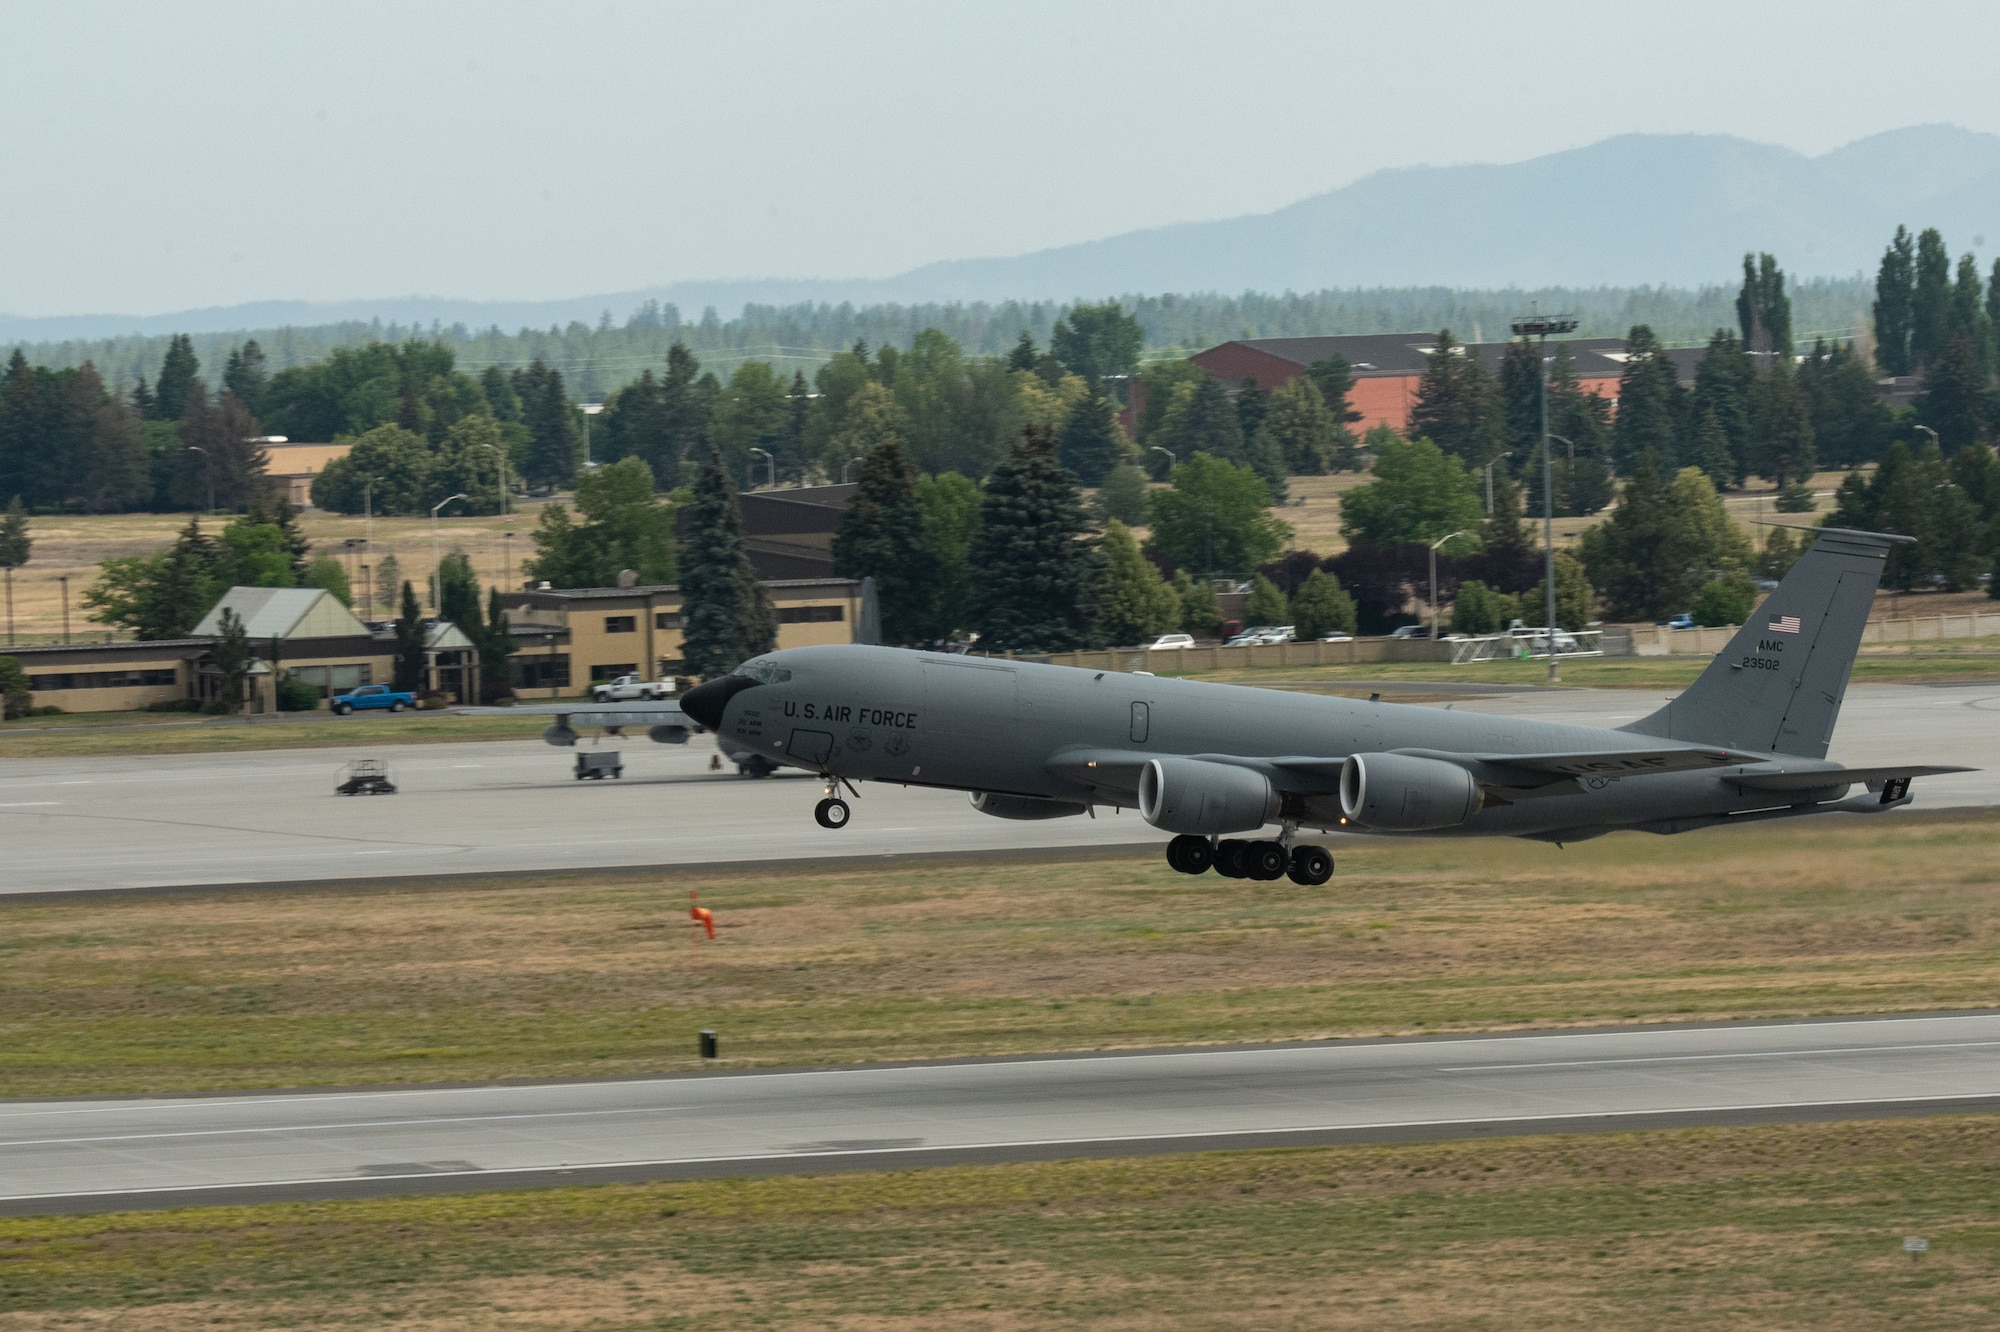 A KC-135 Stratotanker takes off from the flightline as part of Operation Centennial Contact at Fairchild Air Force Base, Washington, June 27, 2023. The movement, which included stops at Yellowstone National Park, Mount Rushmore and Glacier National Park, was part of Air Mobility Command’s celebration of 100 years air refueling operations and demonstrated the 92nd Air Refueling Wing’s global reach capabilities. Since its inception in 1923, Air refueling has become a crucial component of military and civilian aviation operations around the world by extending the range and endurance of aircraft and enabling them to complete missions that would otherwise be impossible or require multiple stops. As a result, this capability is essential for strategic and tactical operations, as well as humanitarian relief efforts in support of AMC, U.S. Transportation Command and Department of Defense priorities. (U.S. Air Force photo by Airman 1st Class Clare Werner)